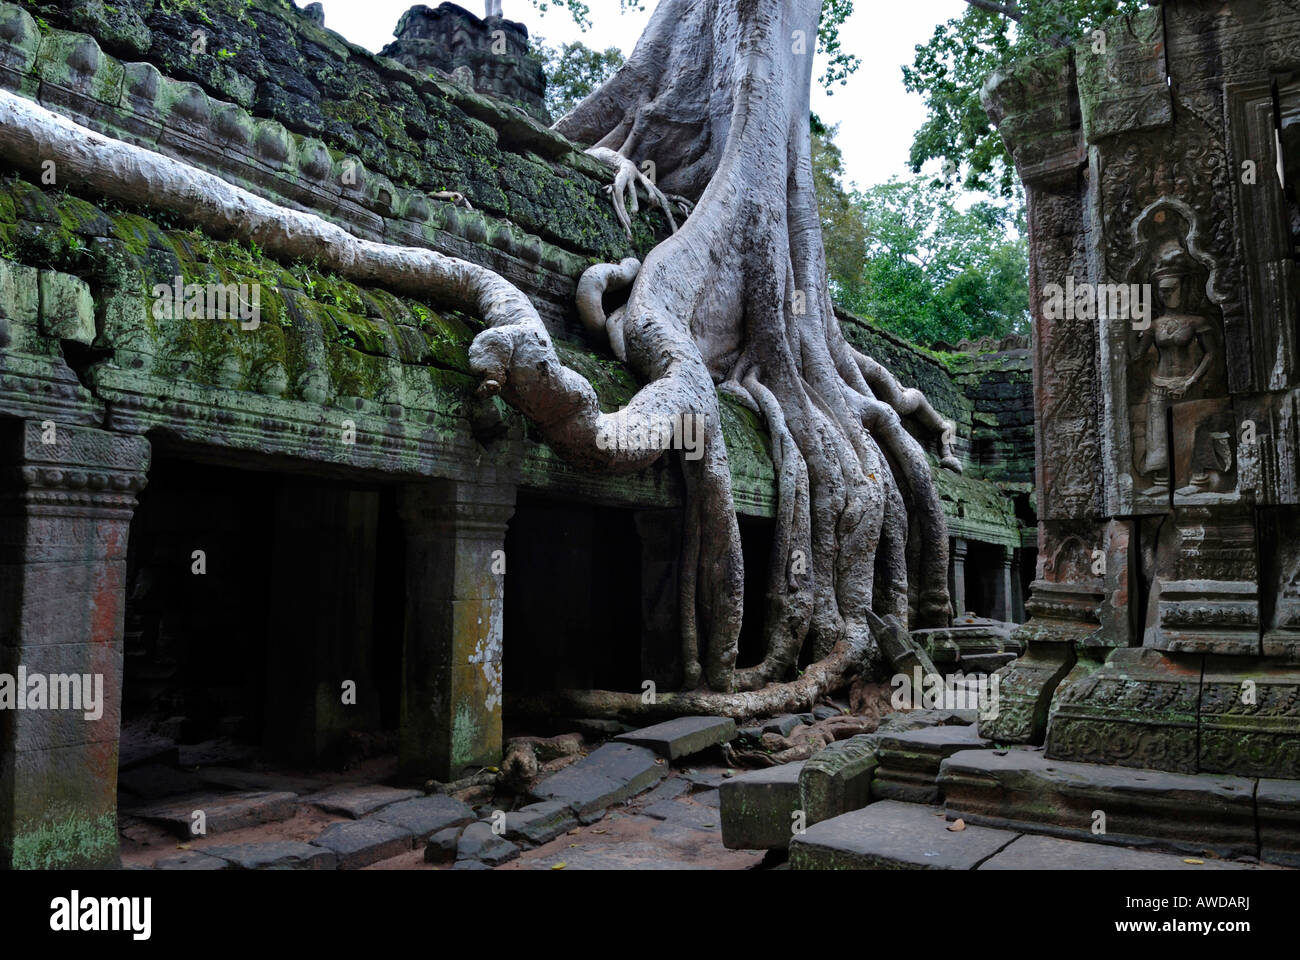 Giant roots of a tropical tree growing over the runins of Ta Prohm tempel, Angkor, Cambodia Stock Photo